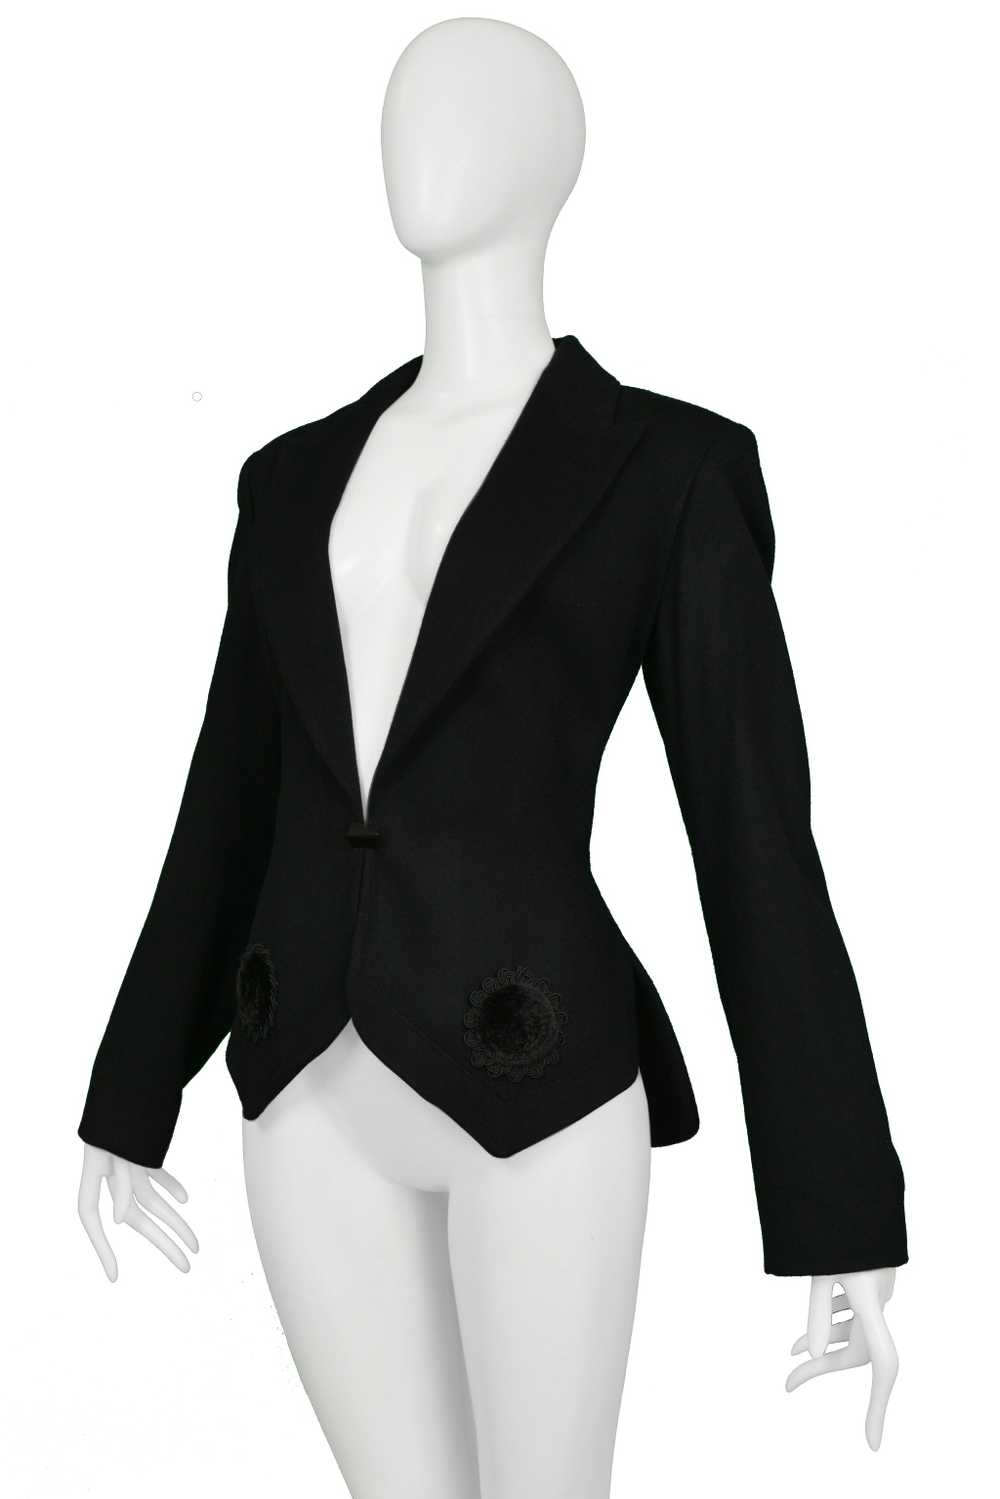 ALAIA BLACK FITTED BLAZER WITH VELVET APPLIQUE 19… - image 3